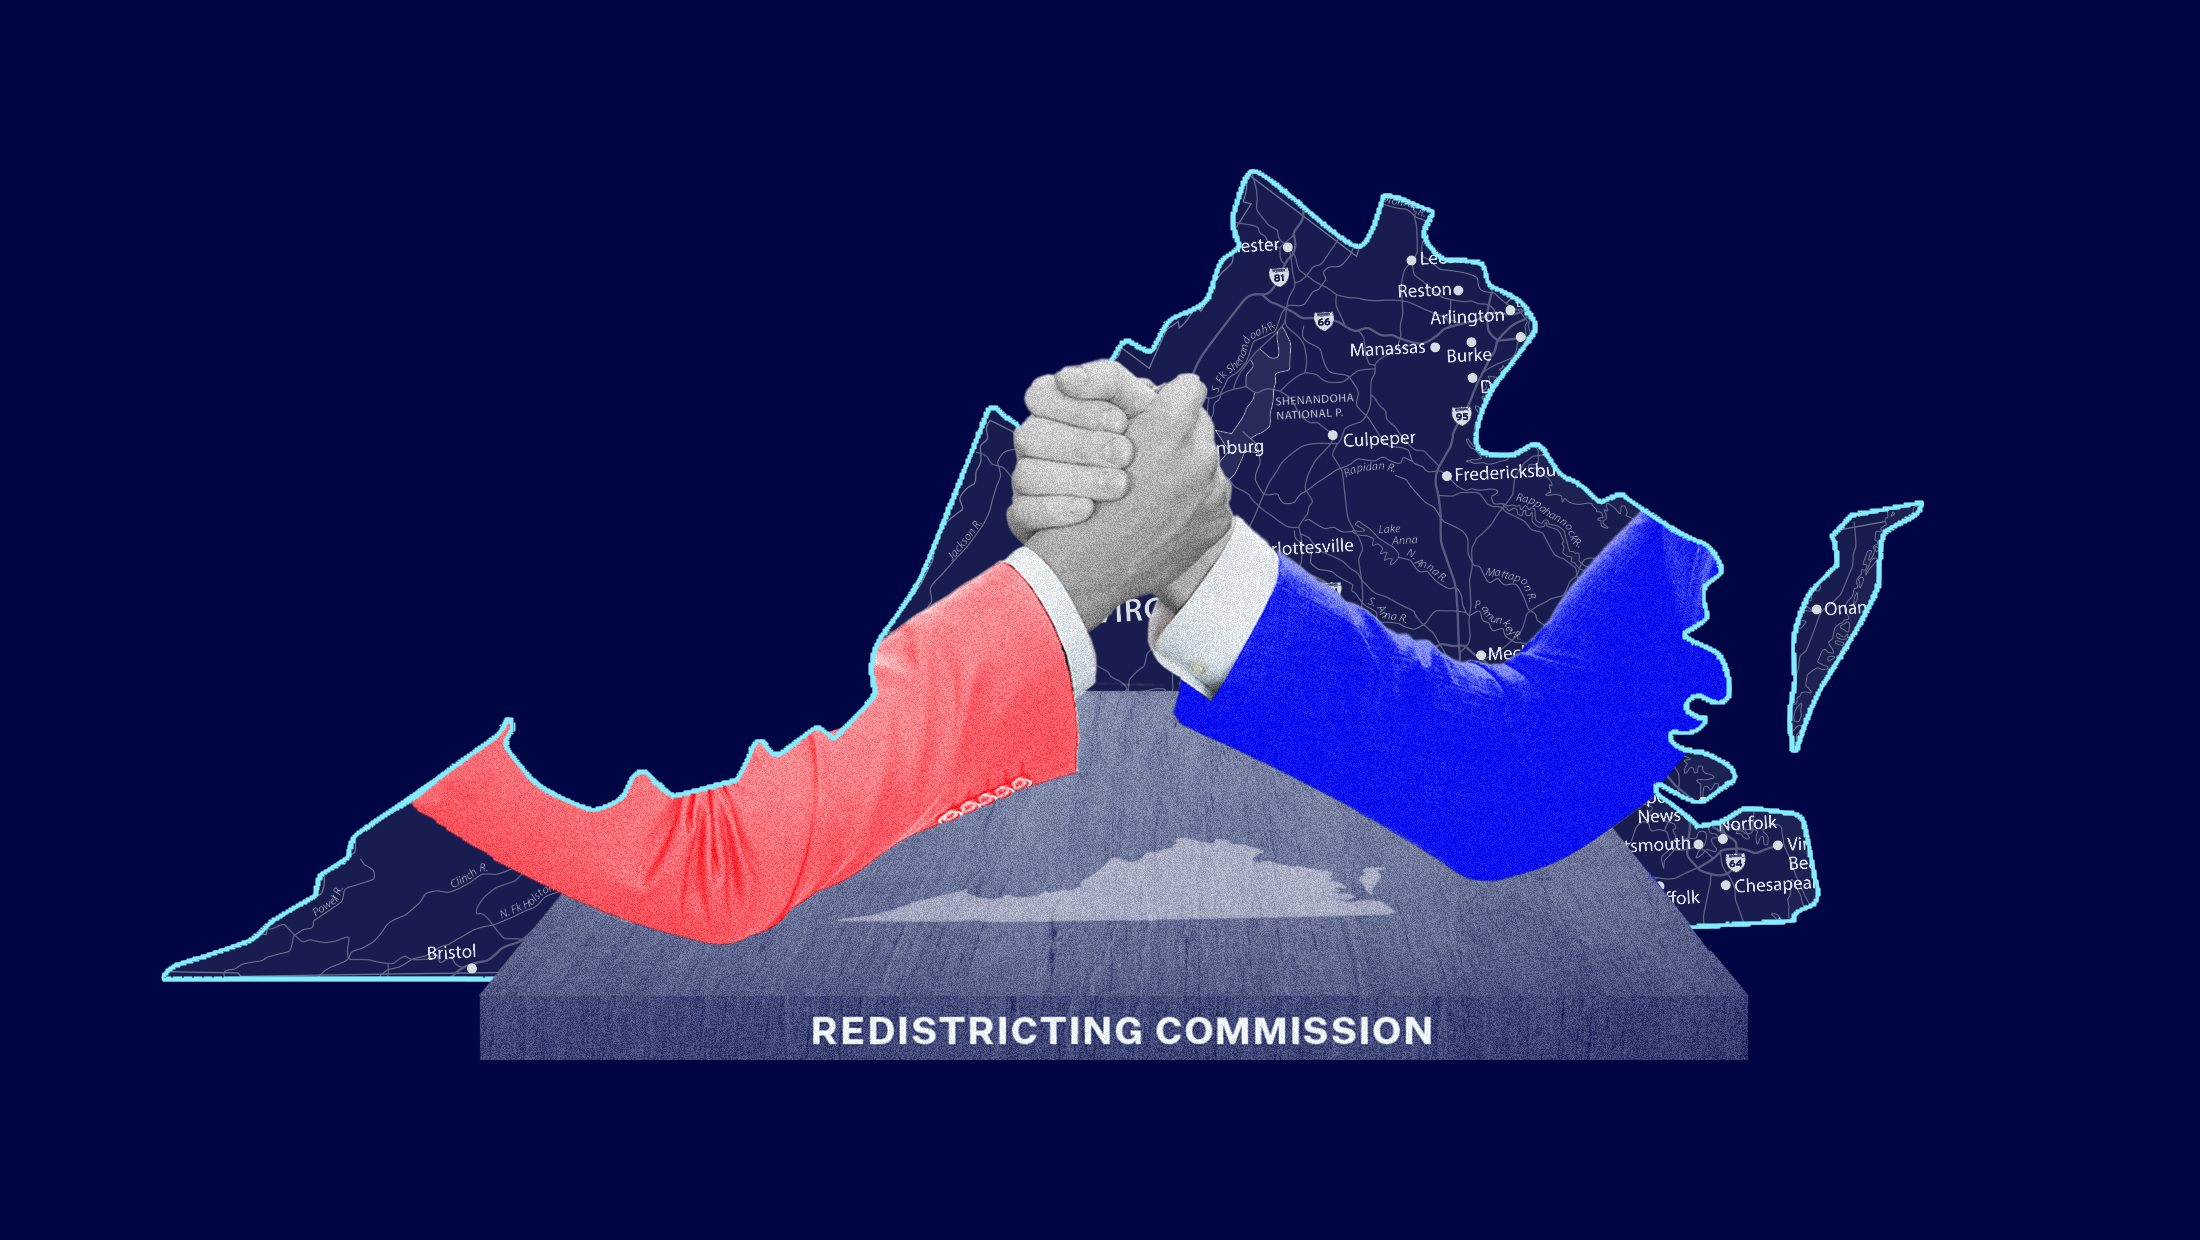 A Democratic and Republican redistricting commissioner arm wrestling on a wooden table that says "REDISTRICTING COMISSION" with a map of Virginia in the background